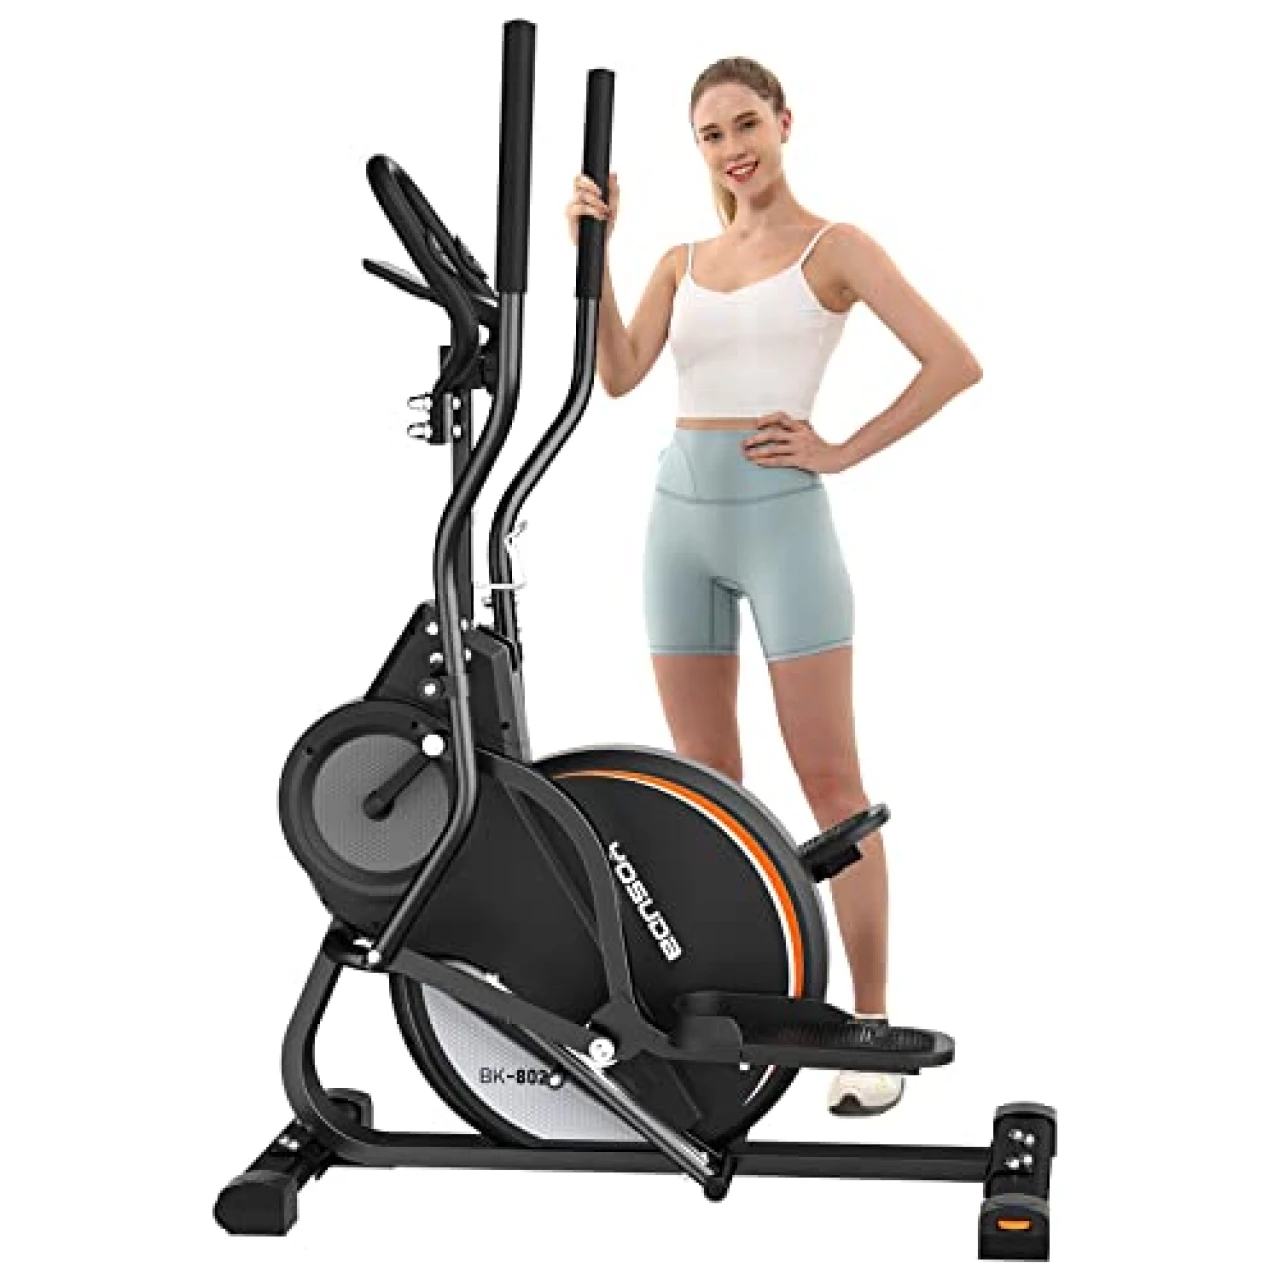 YOSUDA Pro Cardio Climber Stepping Elliptical Machine, 3-in-1 Elliptical Machine &amp; Stair Stepper Trainer, Total Body Fitness Cross Trainer with Hyper-Quiet Magnetic Driving System, 16 Resistance